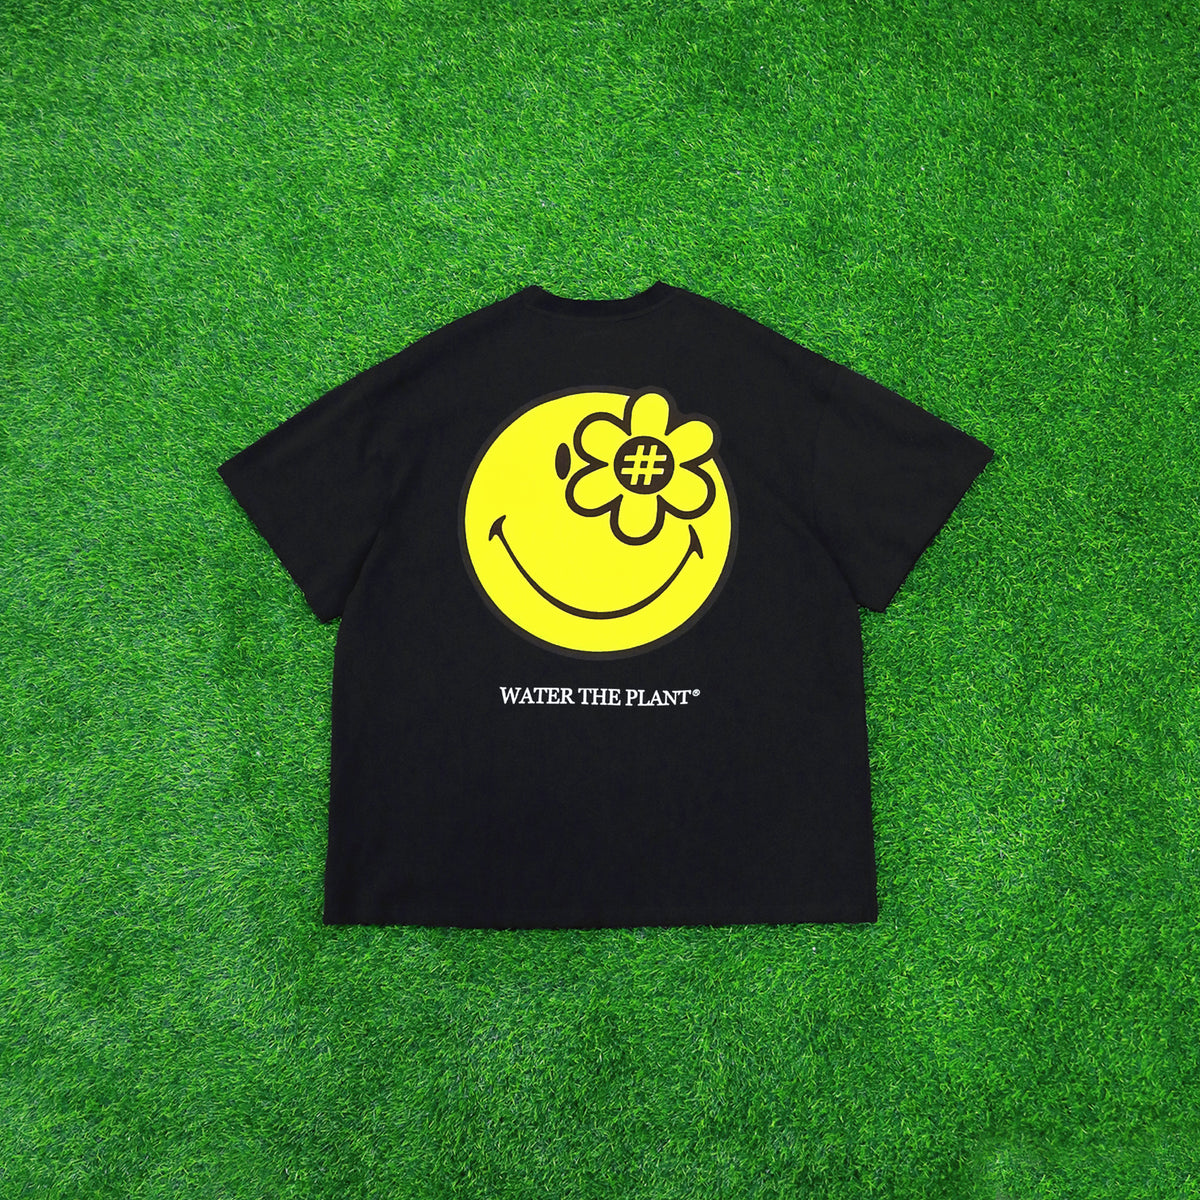 PLAYSAFE TSHIRT | BLACK, Short sleeve, Oversized Fit, Ribbed crewneck, Yellow woven flag logo at the left sleeve, Collaboration with Smiley, Color: Black, Material: 100% Cotton